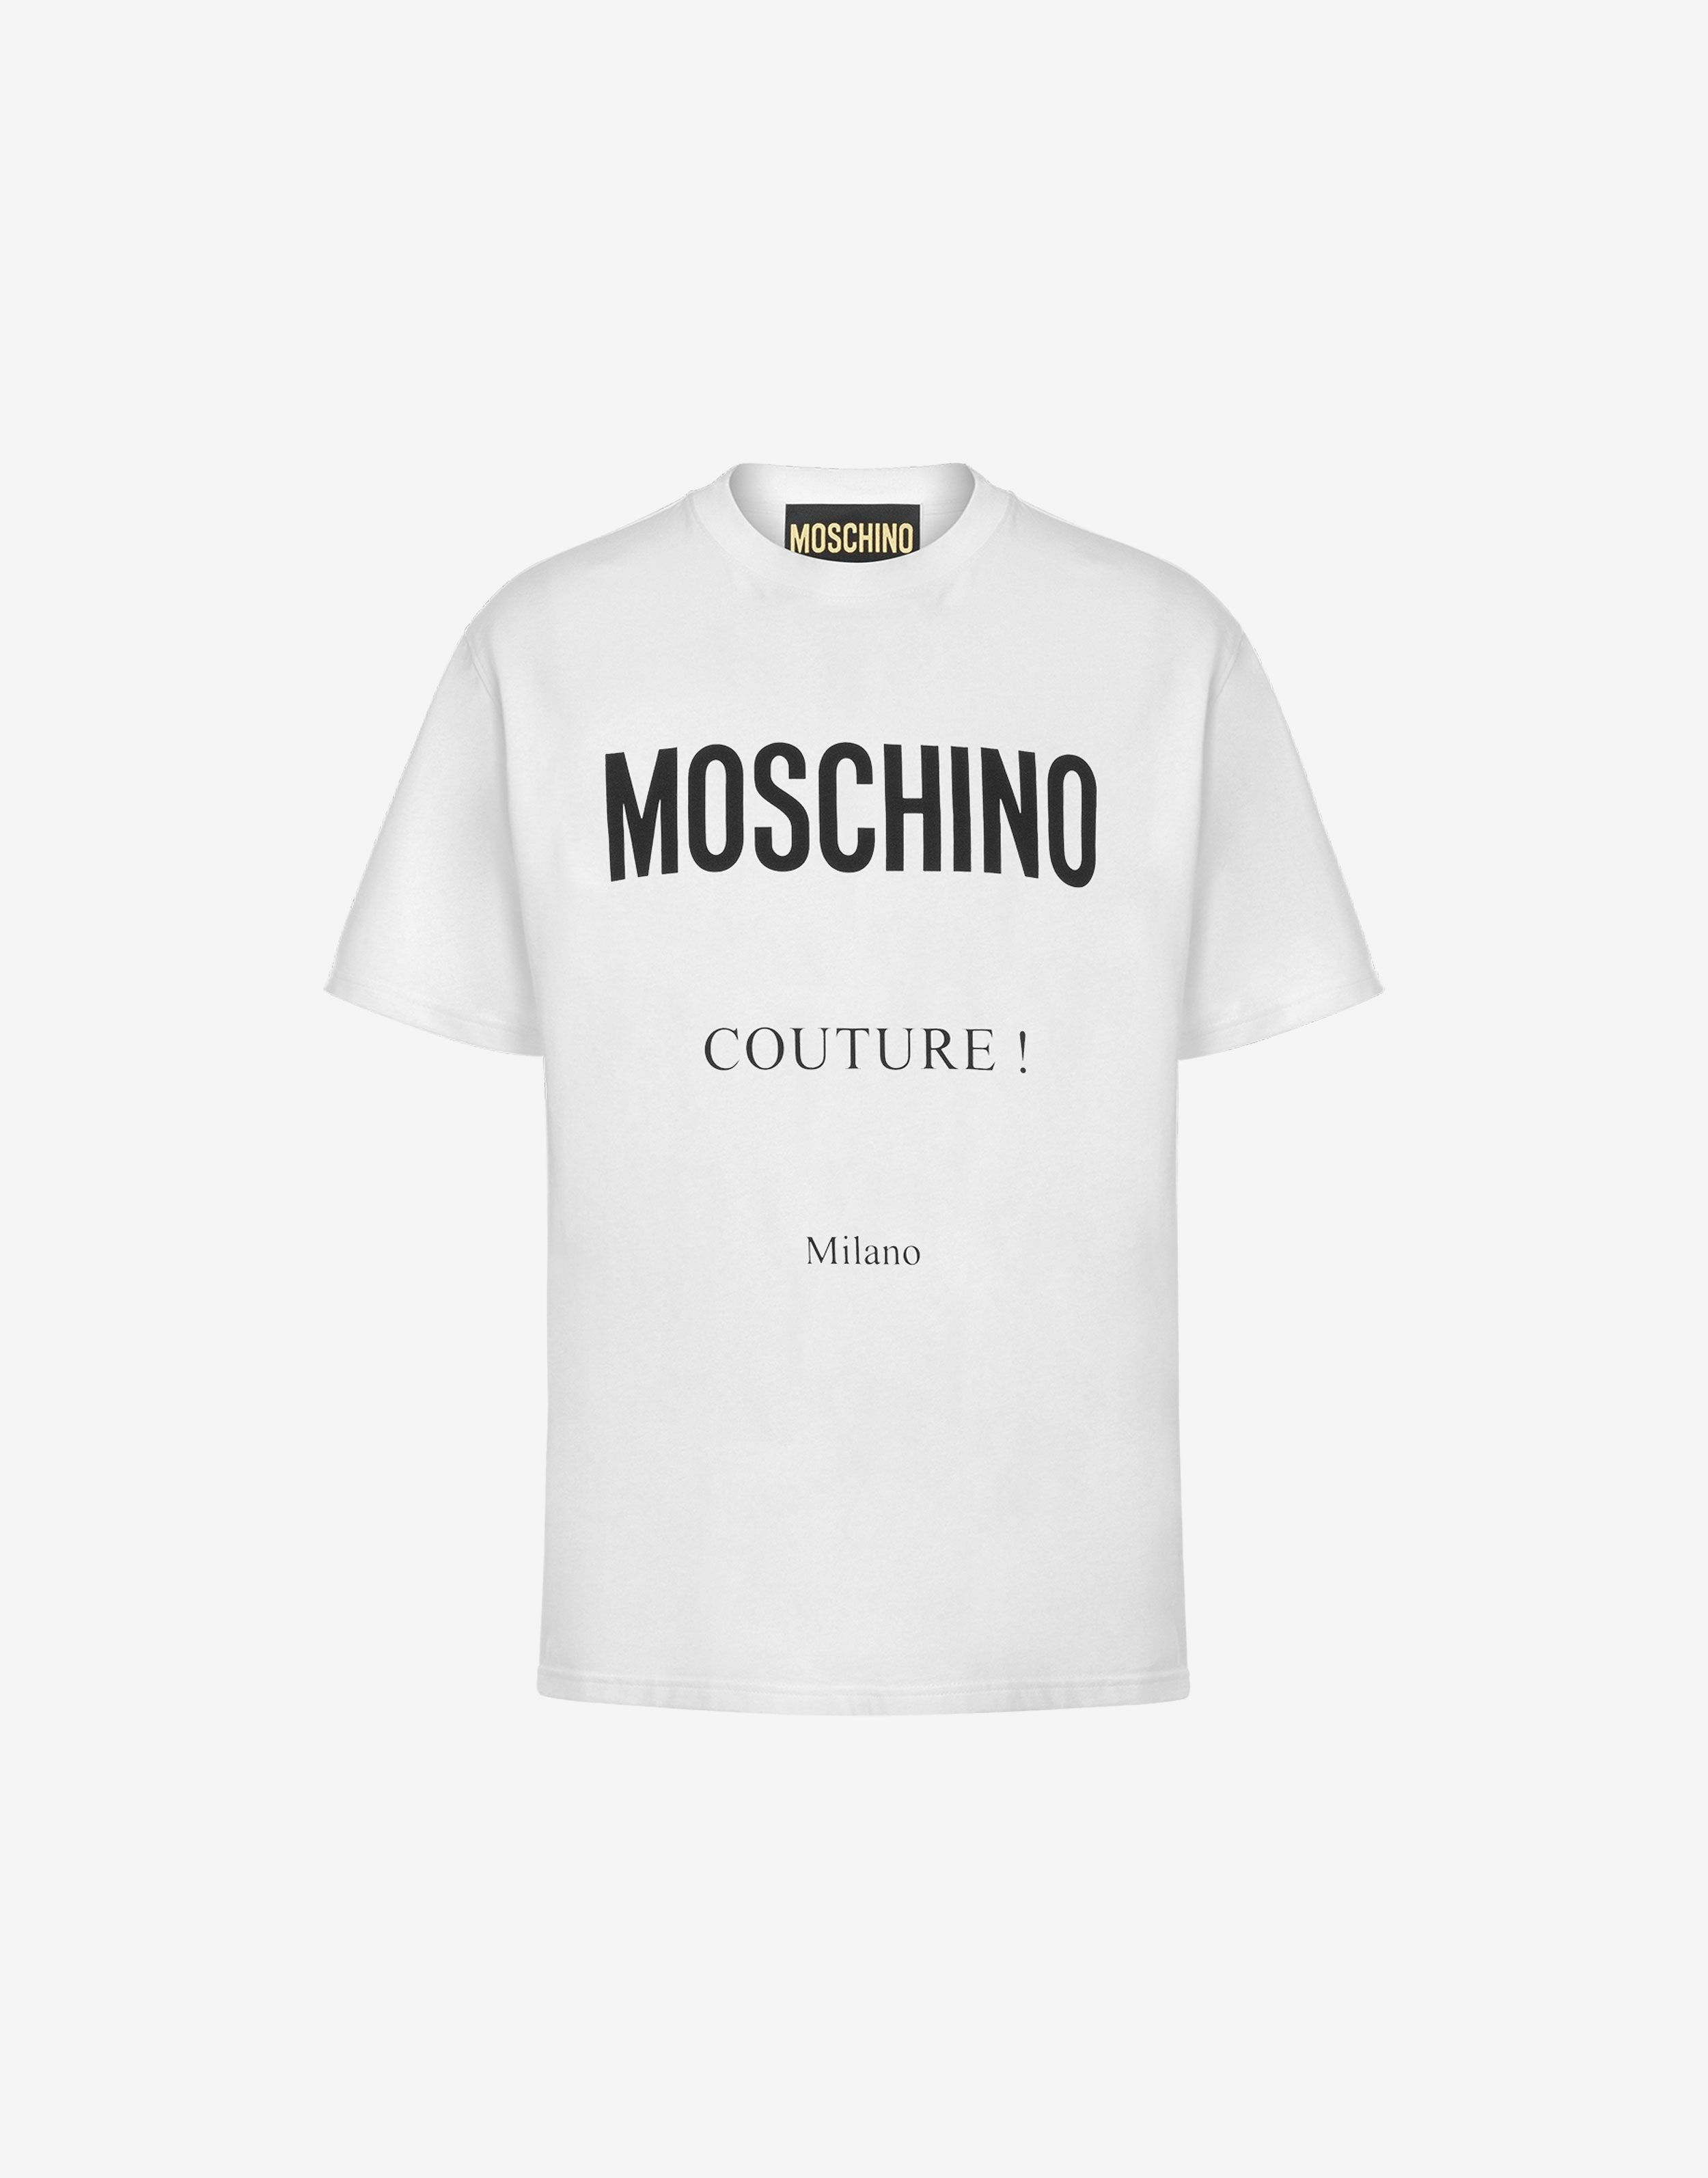 Moschino Couture stretch jersey t-shirt